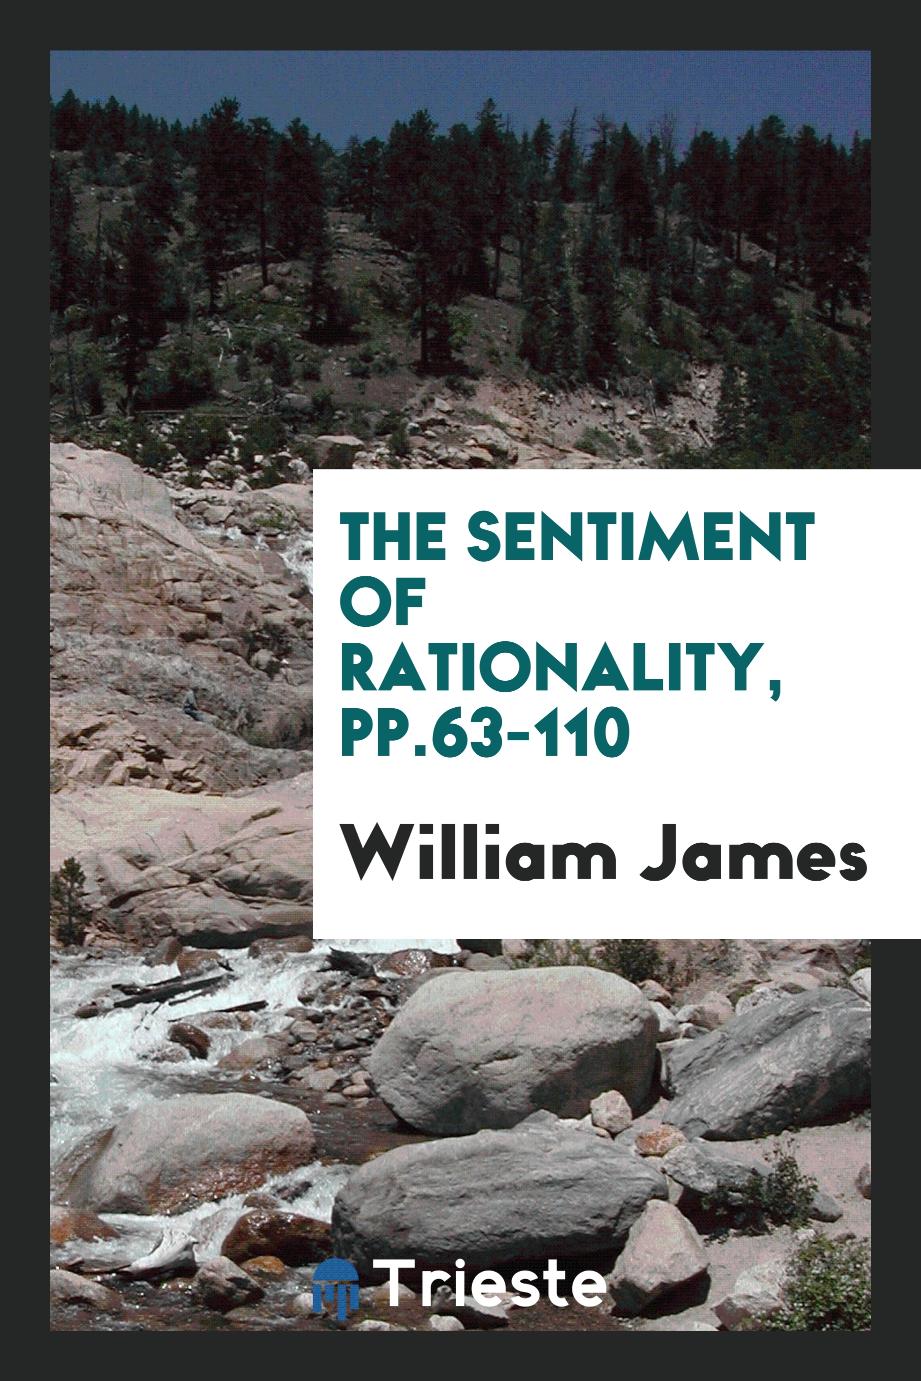 The Sentiment of Rationality, pp.63-110